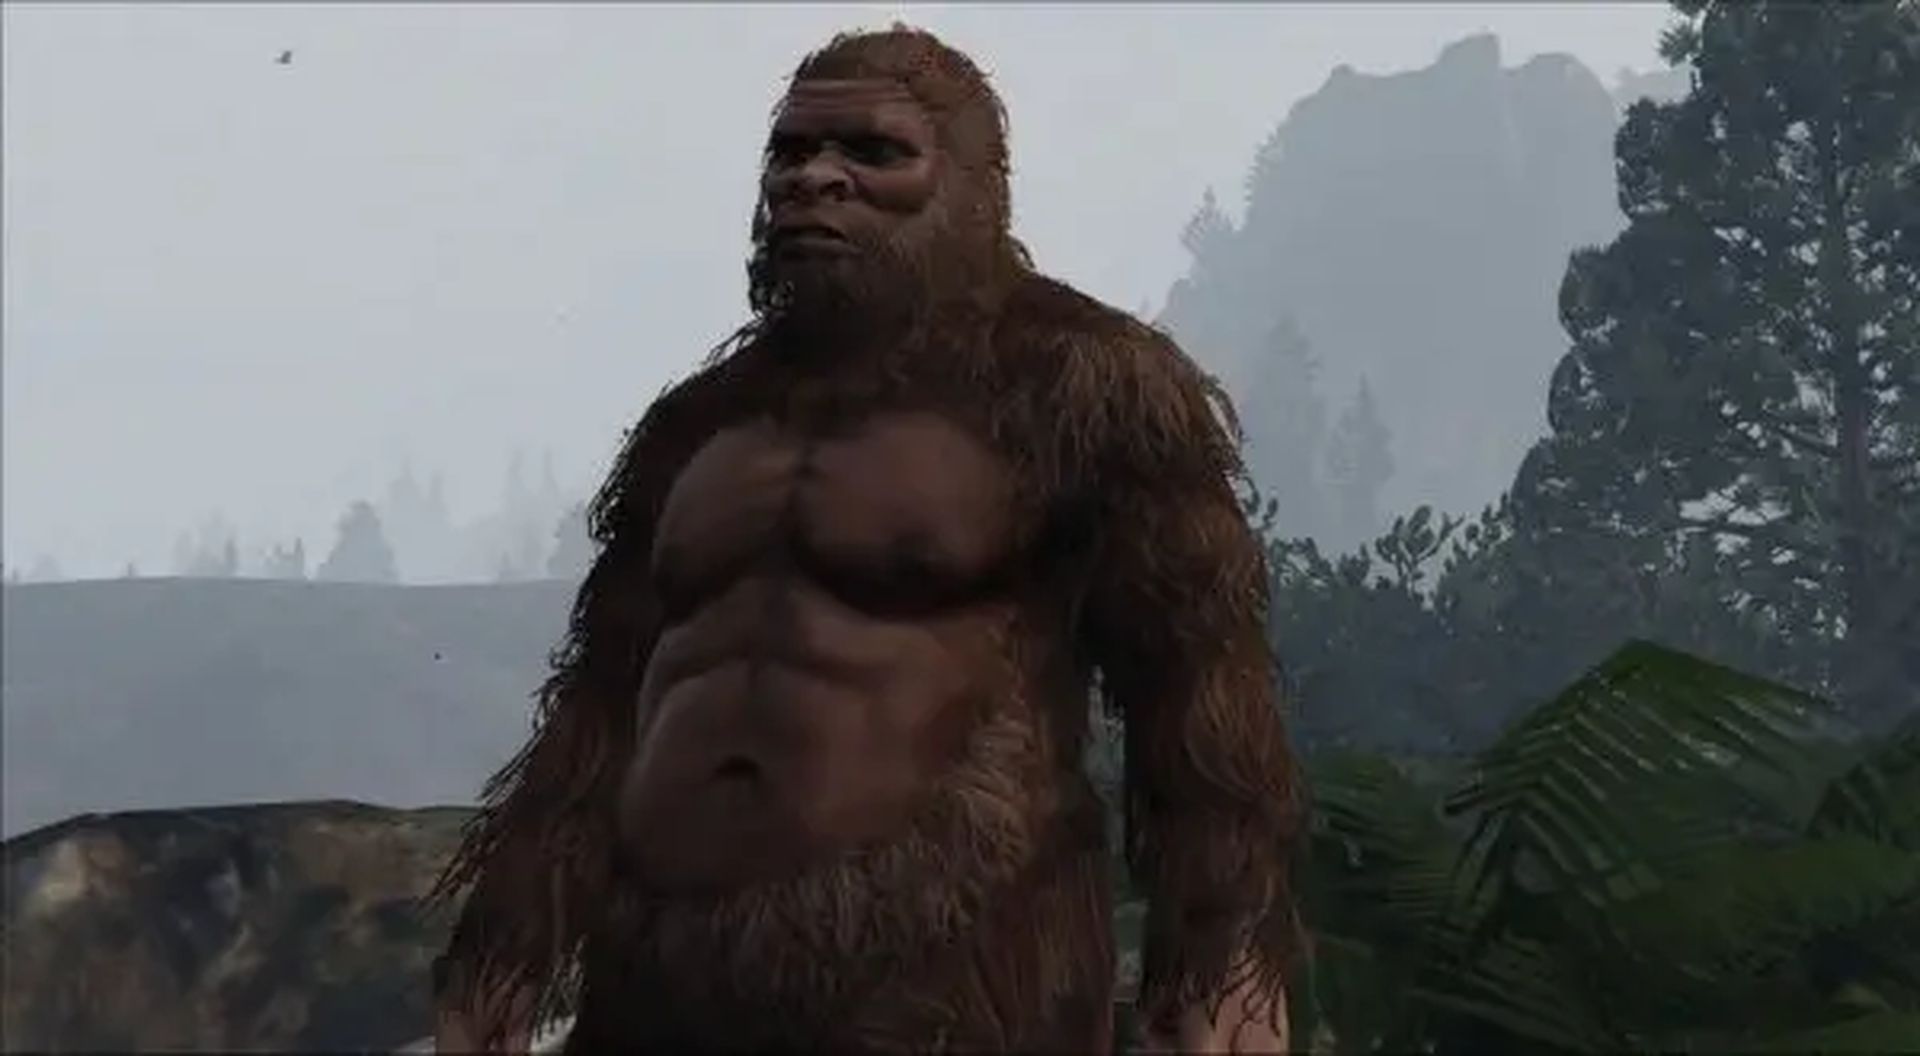 How to get the bigfoot outfit in GTA 5 Online?